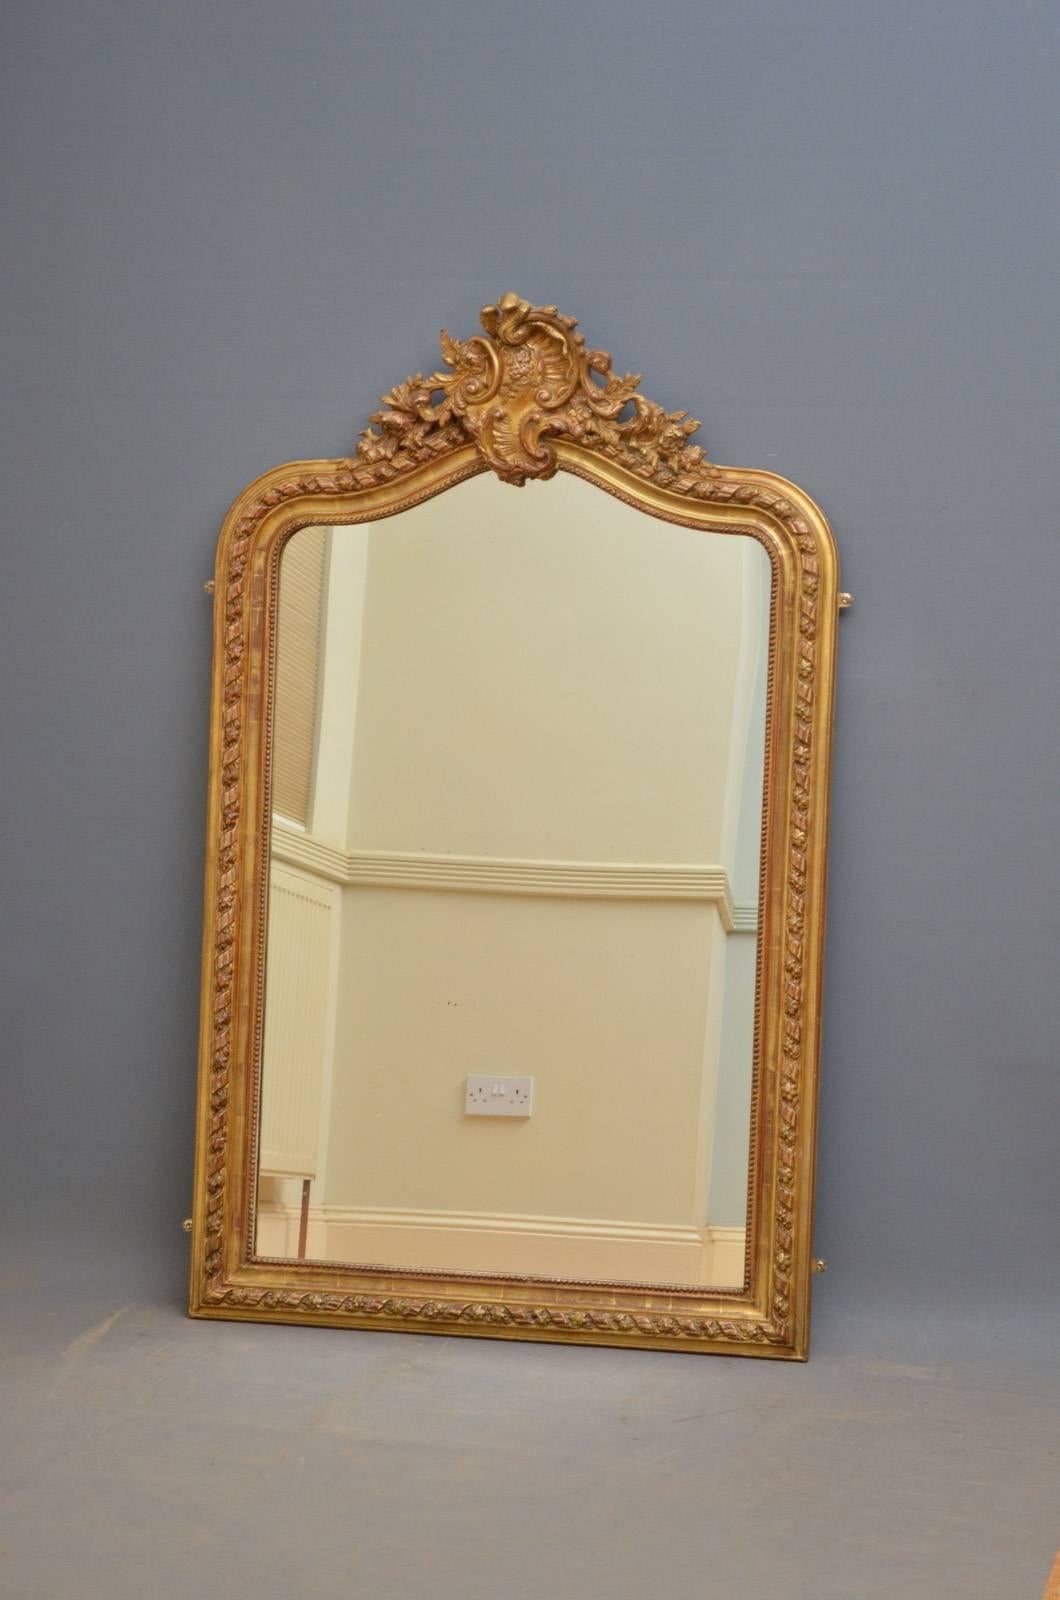 Sn4227, slim 19th century gilded mirror with original mirror plate (with some foxing) in moulded and finely carved frame. All in wonderful condition ready to place at home, circa 1870
Measure: H 57.5